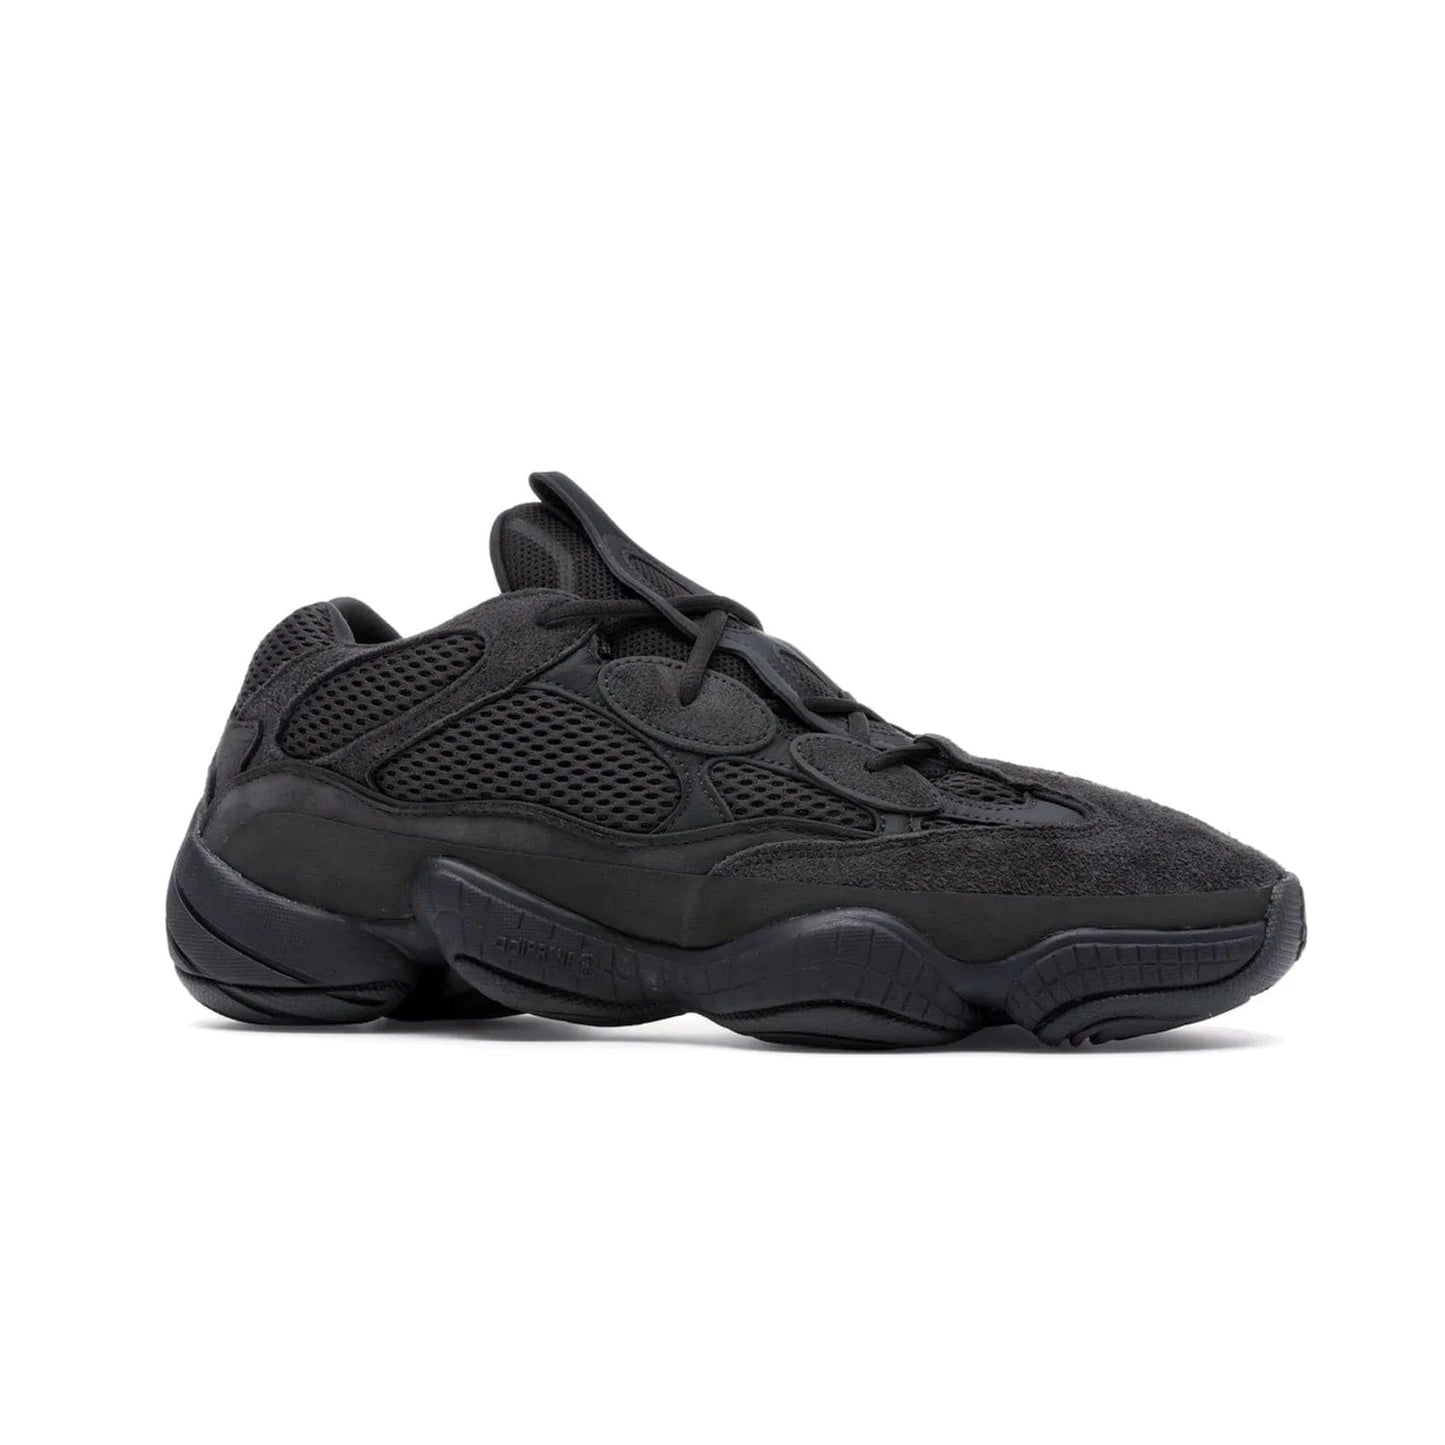 adidas Yeezy 500 Utility Black - Image 3 - Only at www.BallersClubKickz.com - Iconic adidas Yeezy 500 Utility Black in All-Black colorway. Durable black mesh and suede upper with adiPRENE® sole delivers comfort and support. Be unstoppable with the Yeezy 500 Utility Black. Released July 2018.